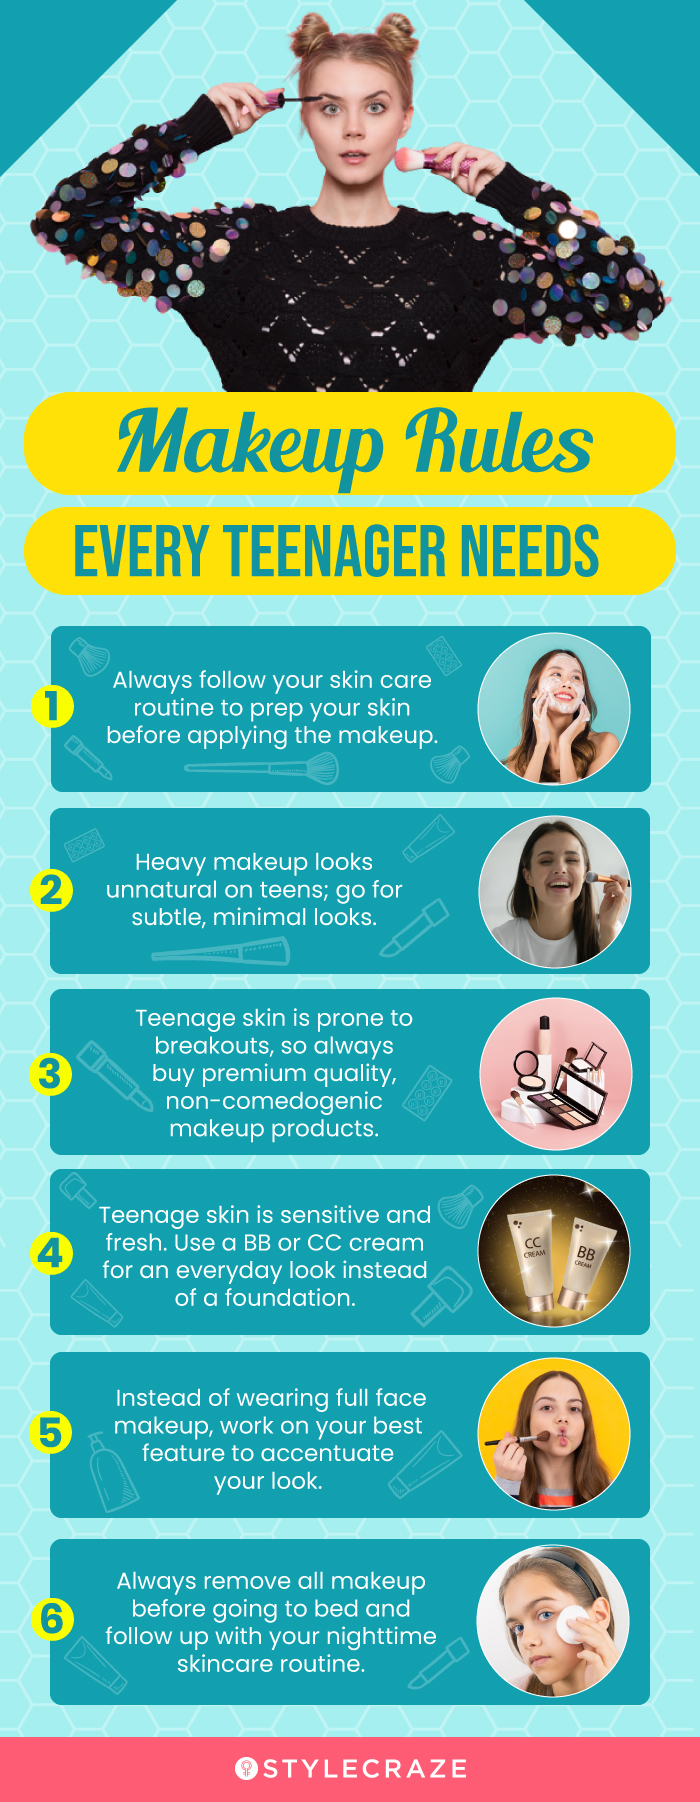 7 Best Makeup Products For Teens